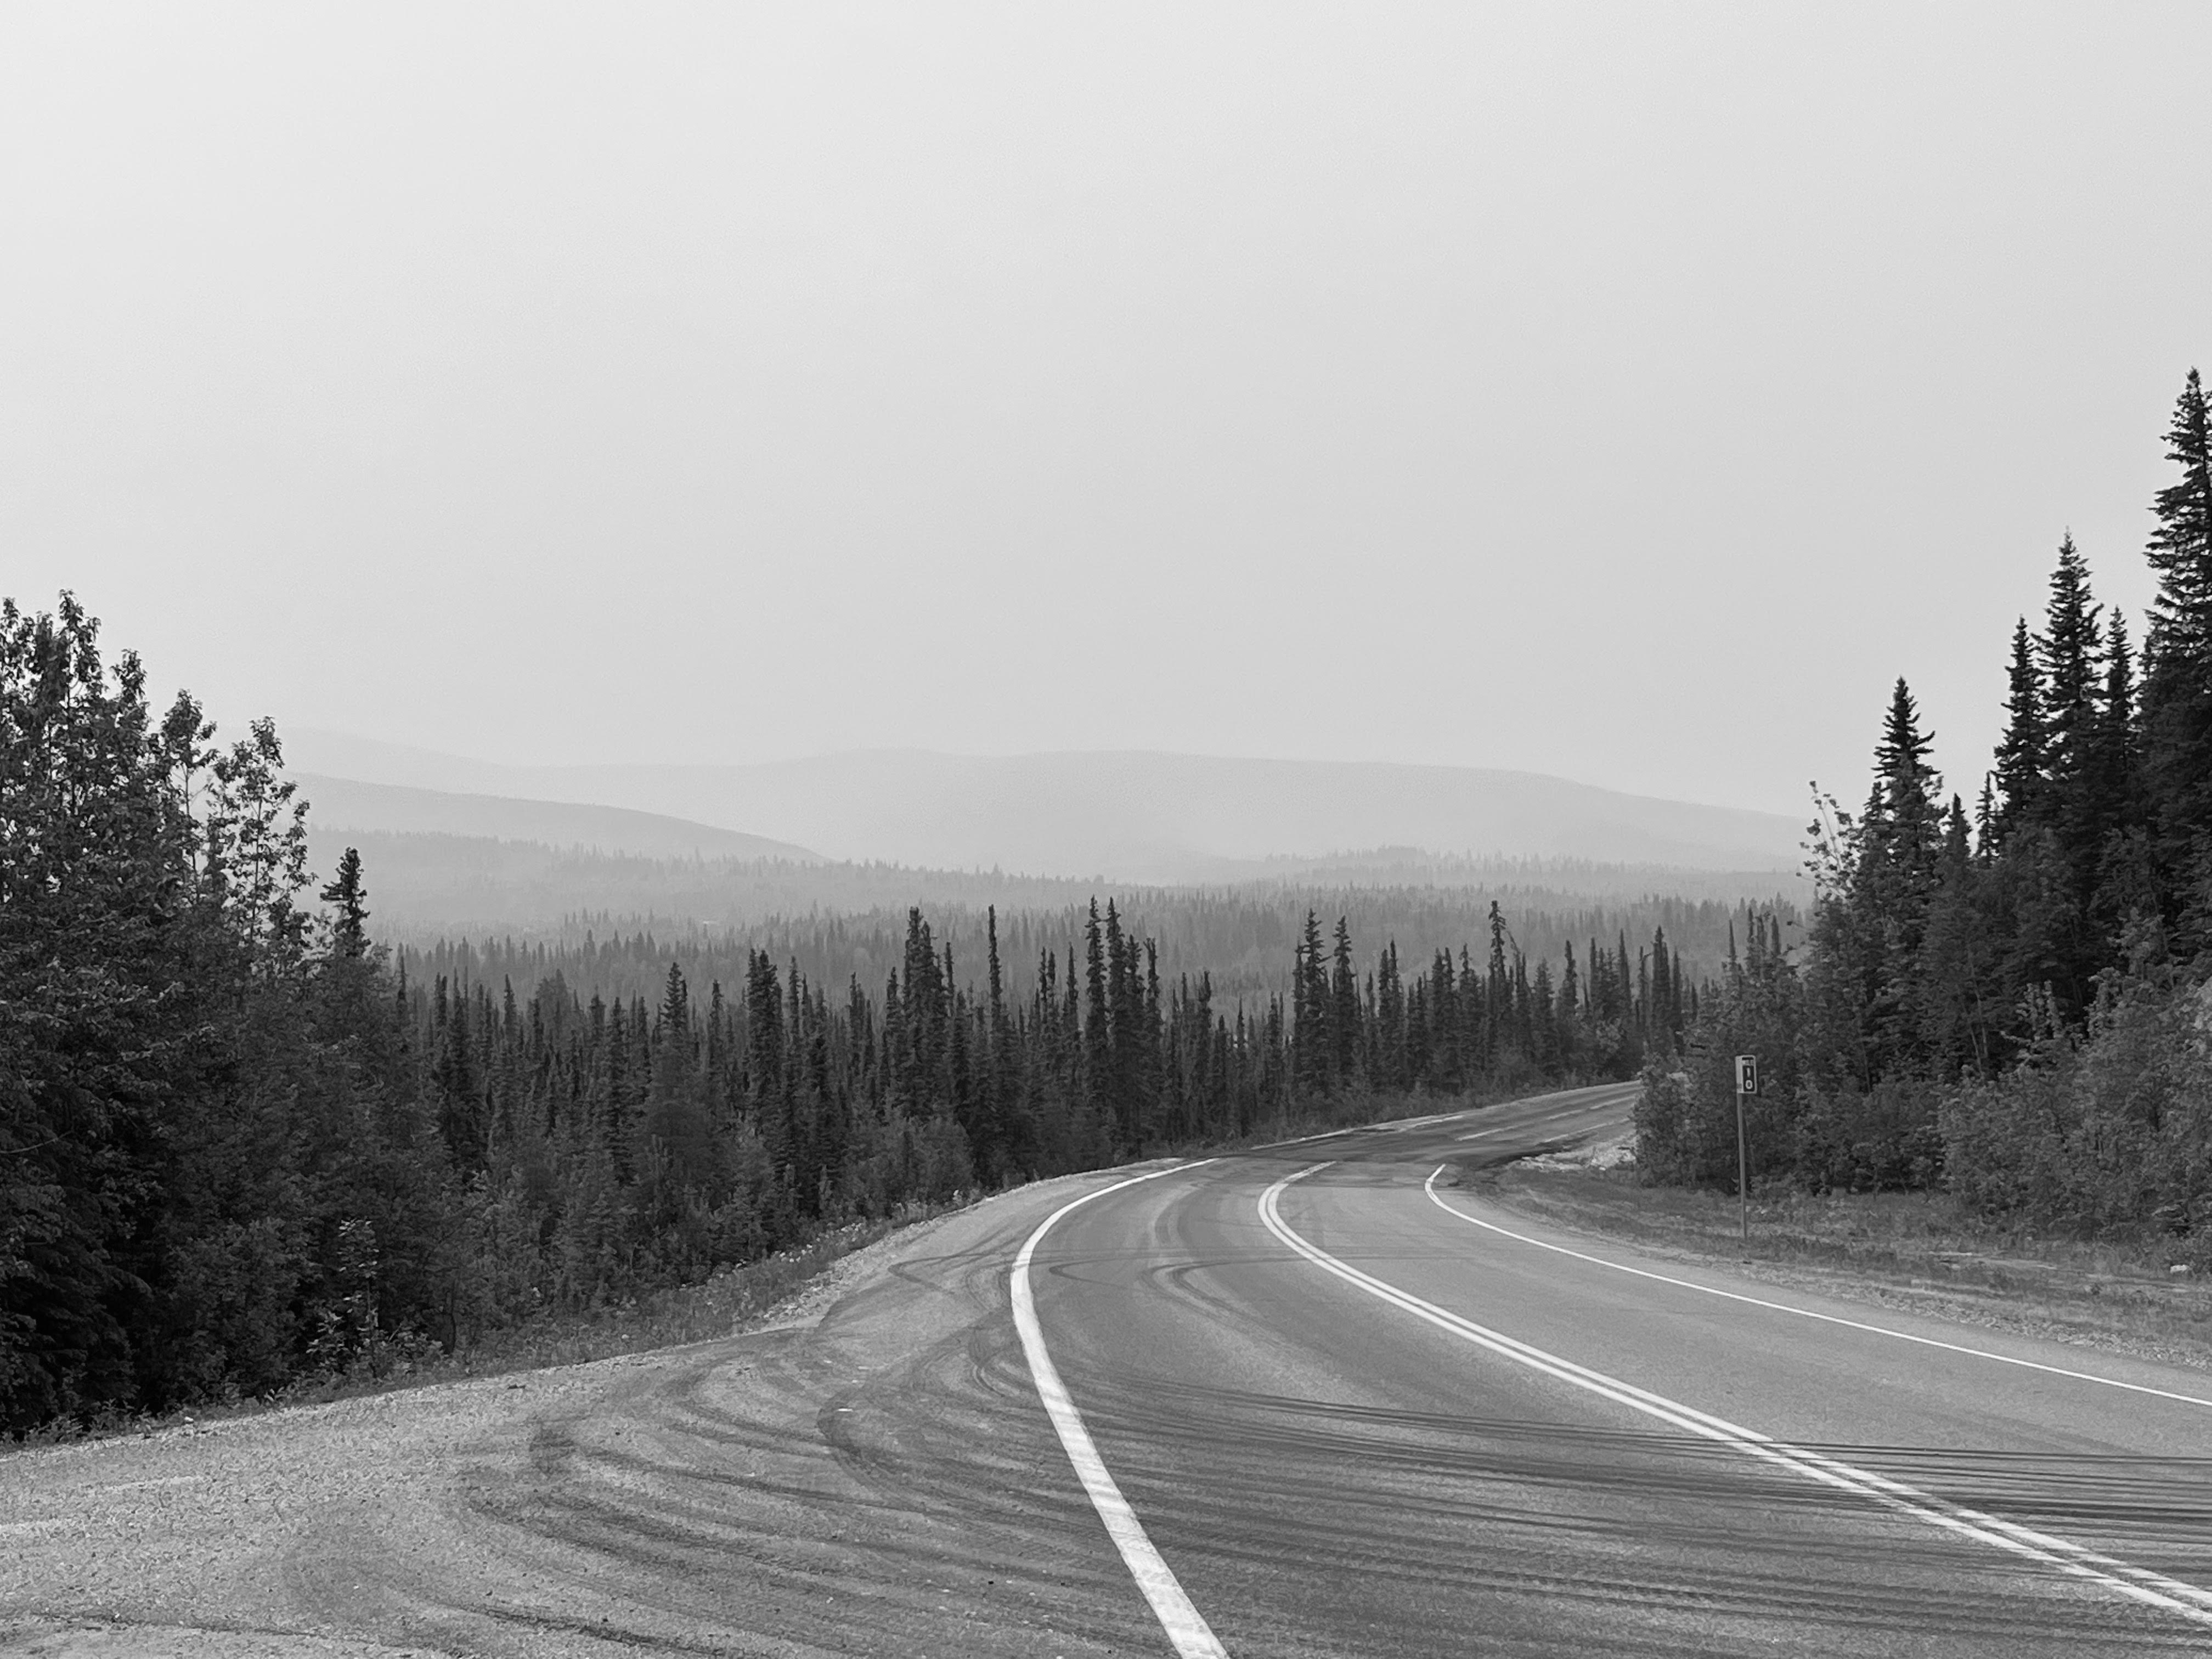 Black and white photo of a two lane road that bends to the right, separating a forest of short, but dense evergreens rising along a gentle incline to the right. The forest extends in the background, eventually blending into foggy rolling mountains. Multiple tire tracks cut across the road, suggesting wide turns.